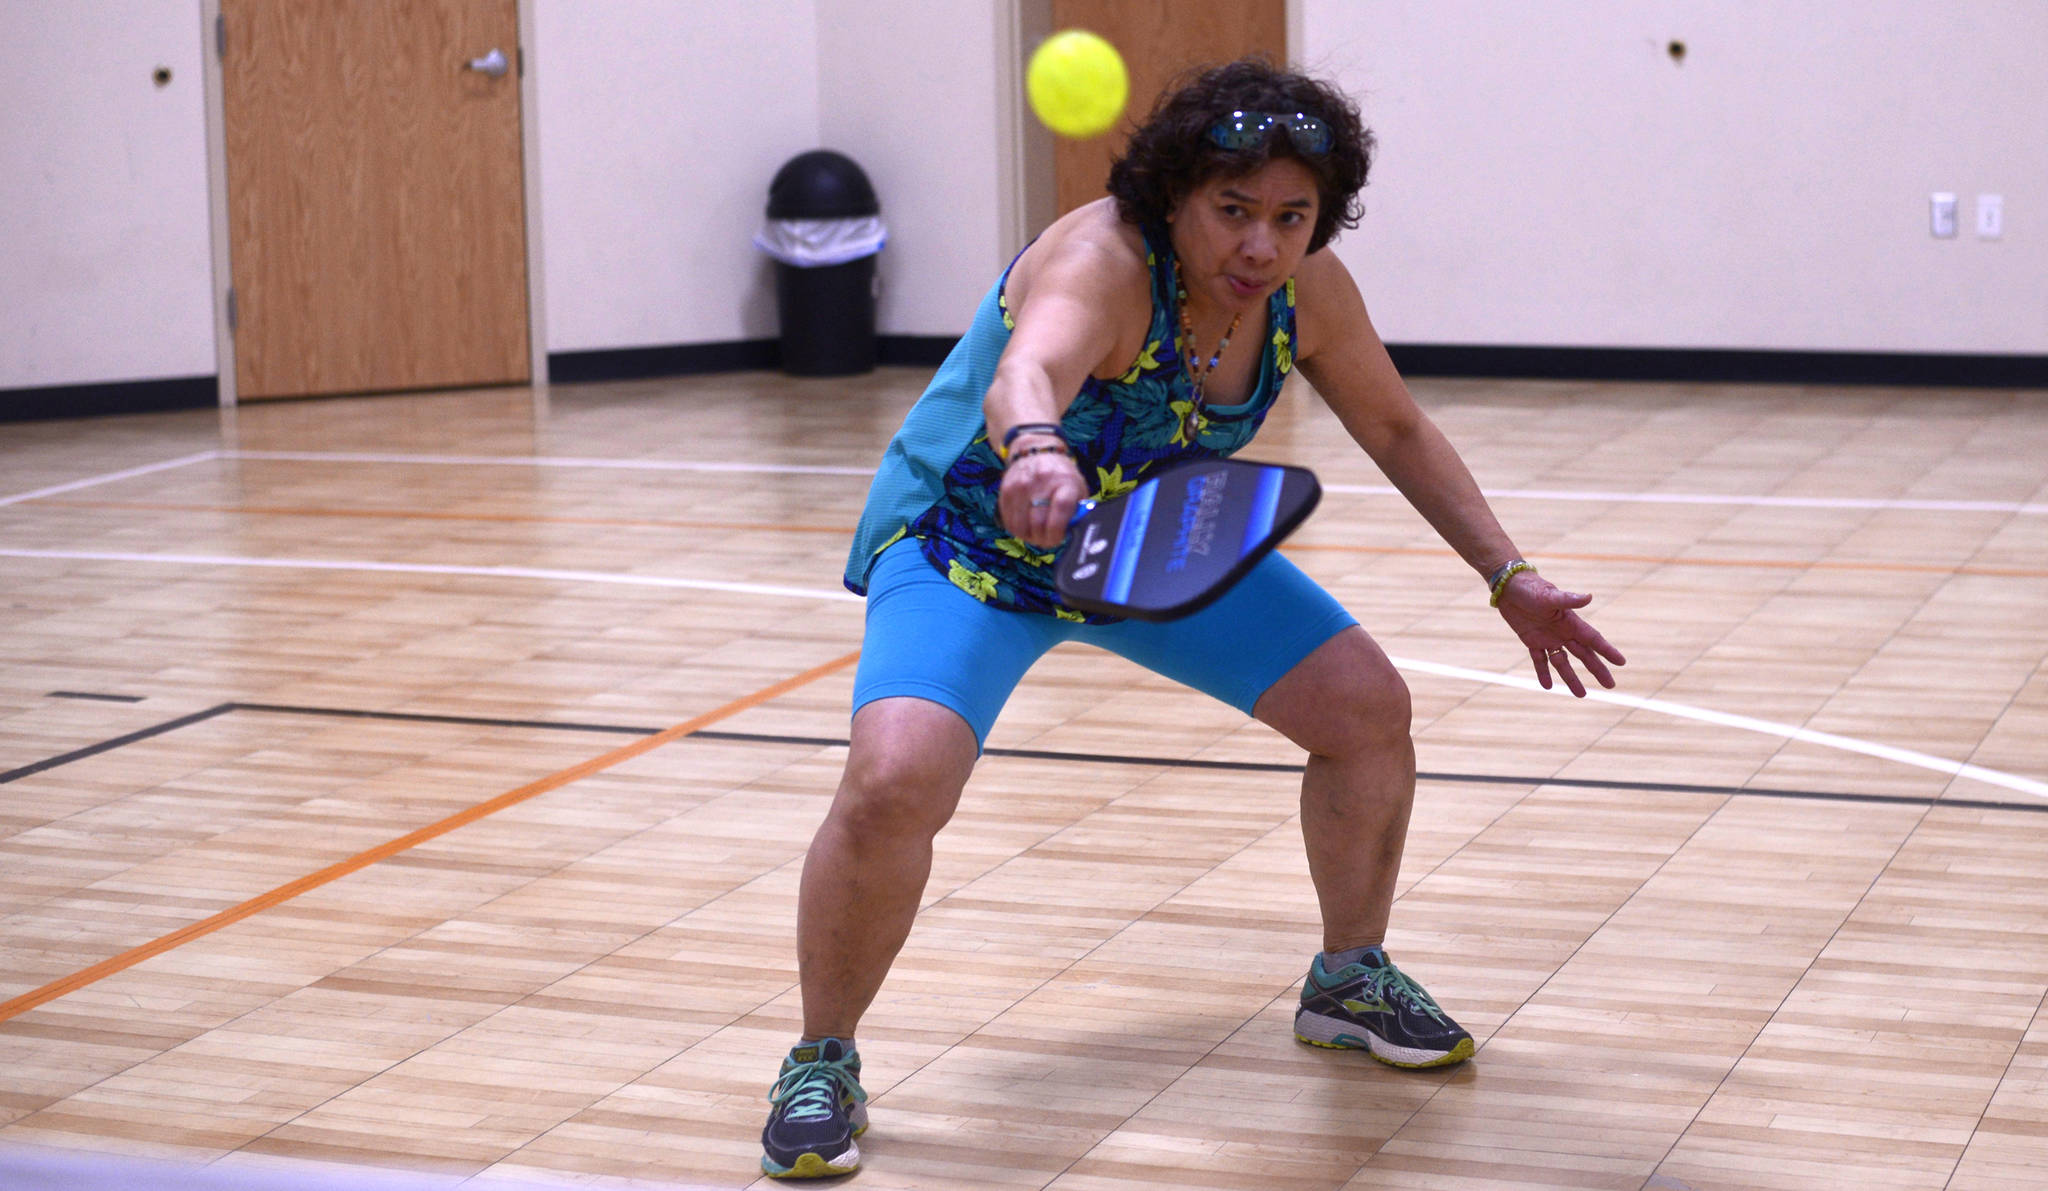 Pickleball padawan Ludy Link returns a volley in a game of pickleball at the Pickleball Skills and Drills instructional clinic on Monday, March 27, 2017 at the Sterling Community Center in Sterling, Alaska. The Sterling Community Center recently began offering introductionary lessons to the tennis-like game every Monday from 11:30 a.m to 1:00 p.m. The classes cost $6, or are free for Sterling Community Center members.